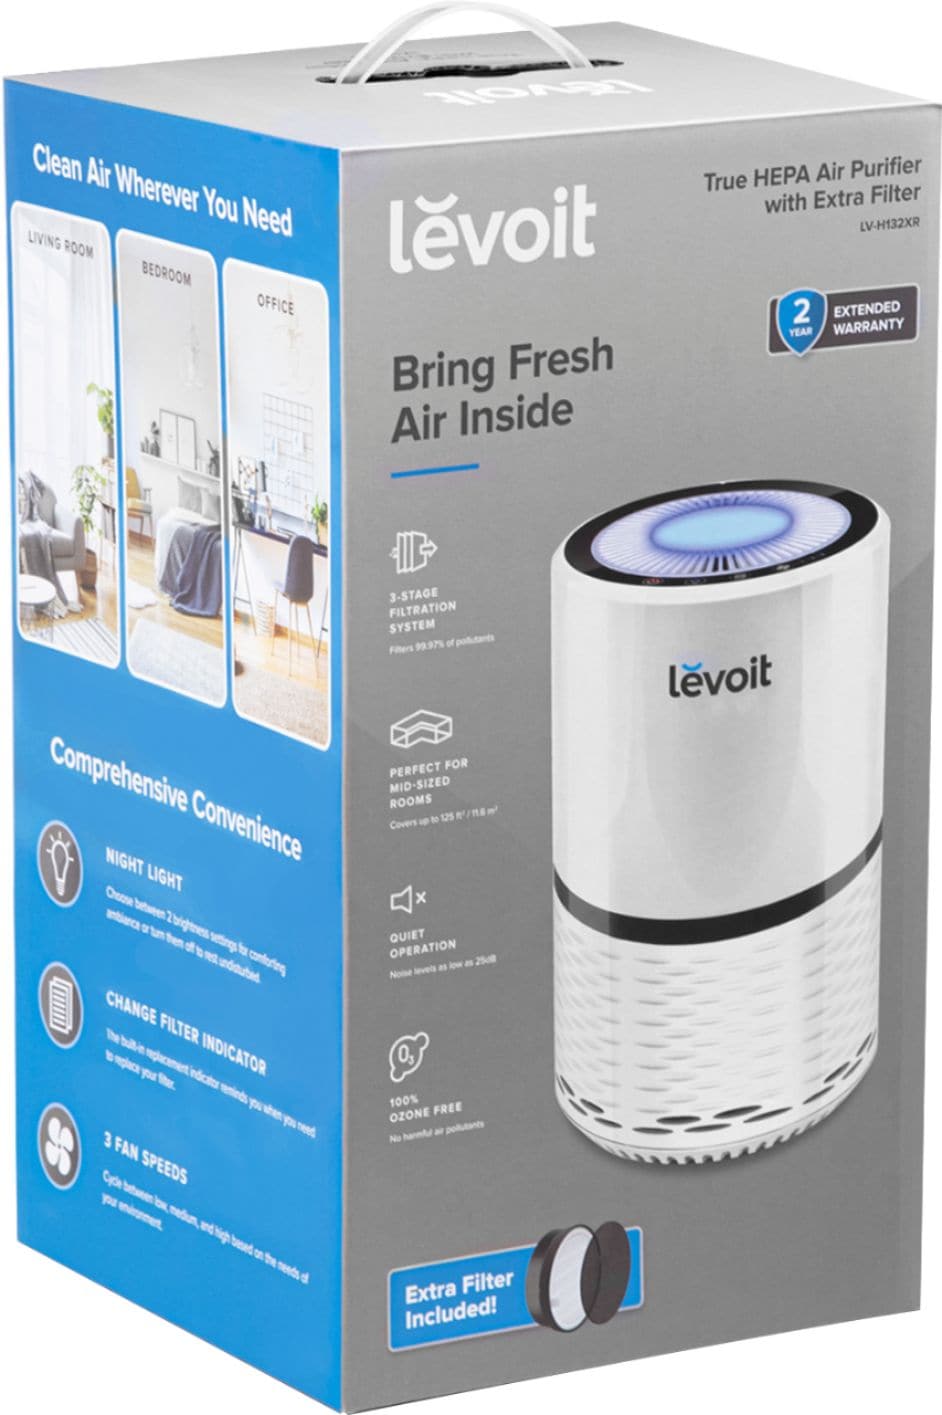 Levoit - Aerone 129 Sq. Ft True HEPA Air Purifier with Replacement Filter - White_3